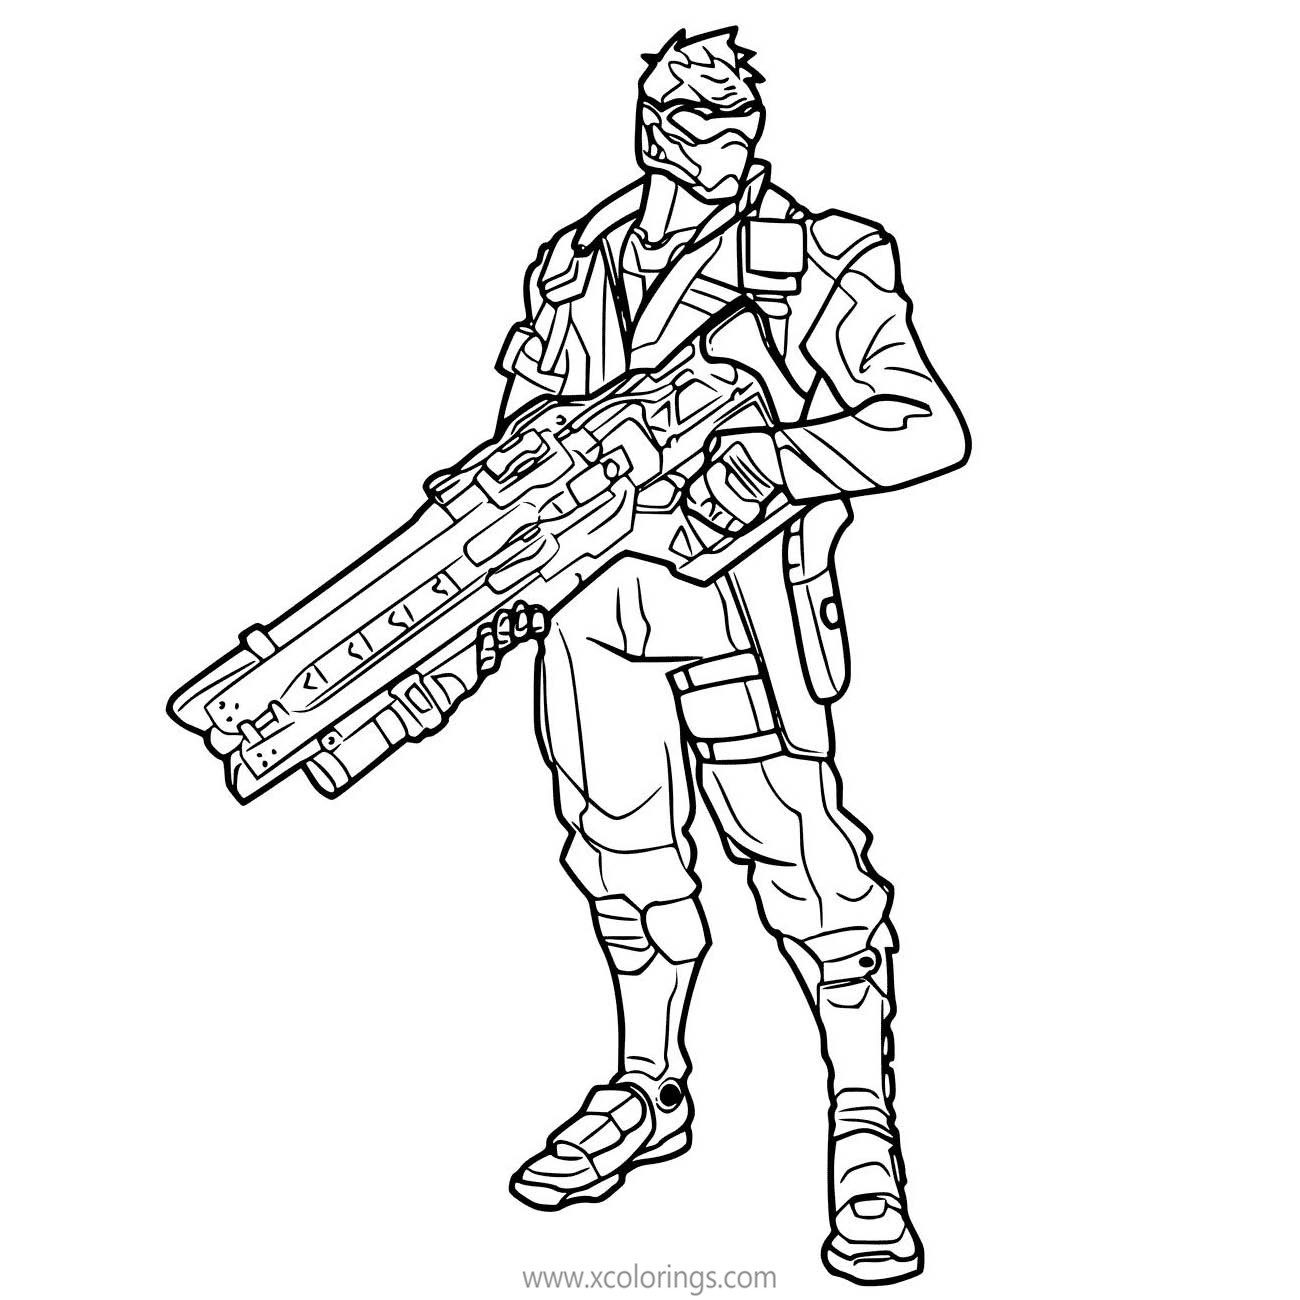 Free Overwatch Coloring Pages Soldier printable